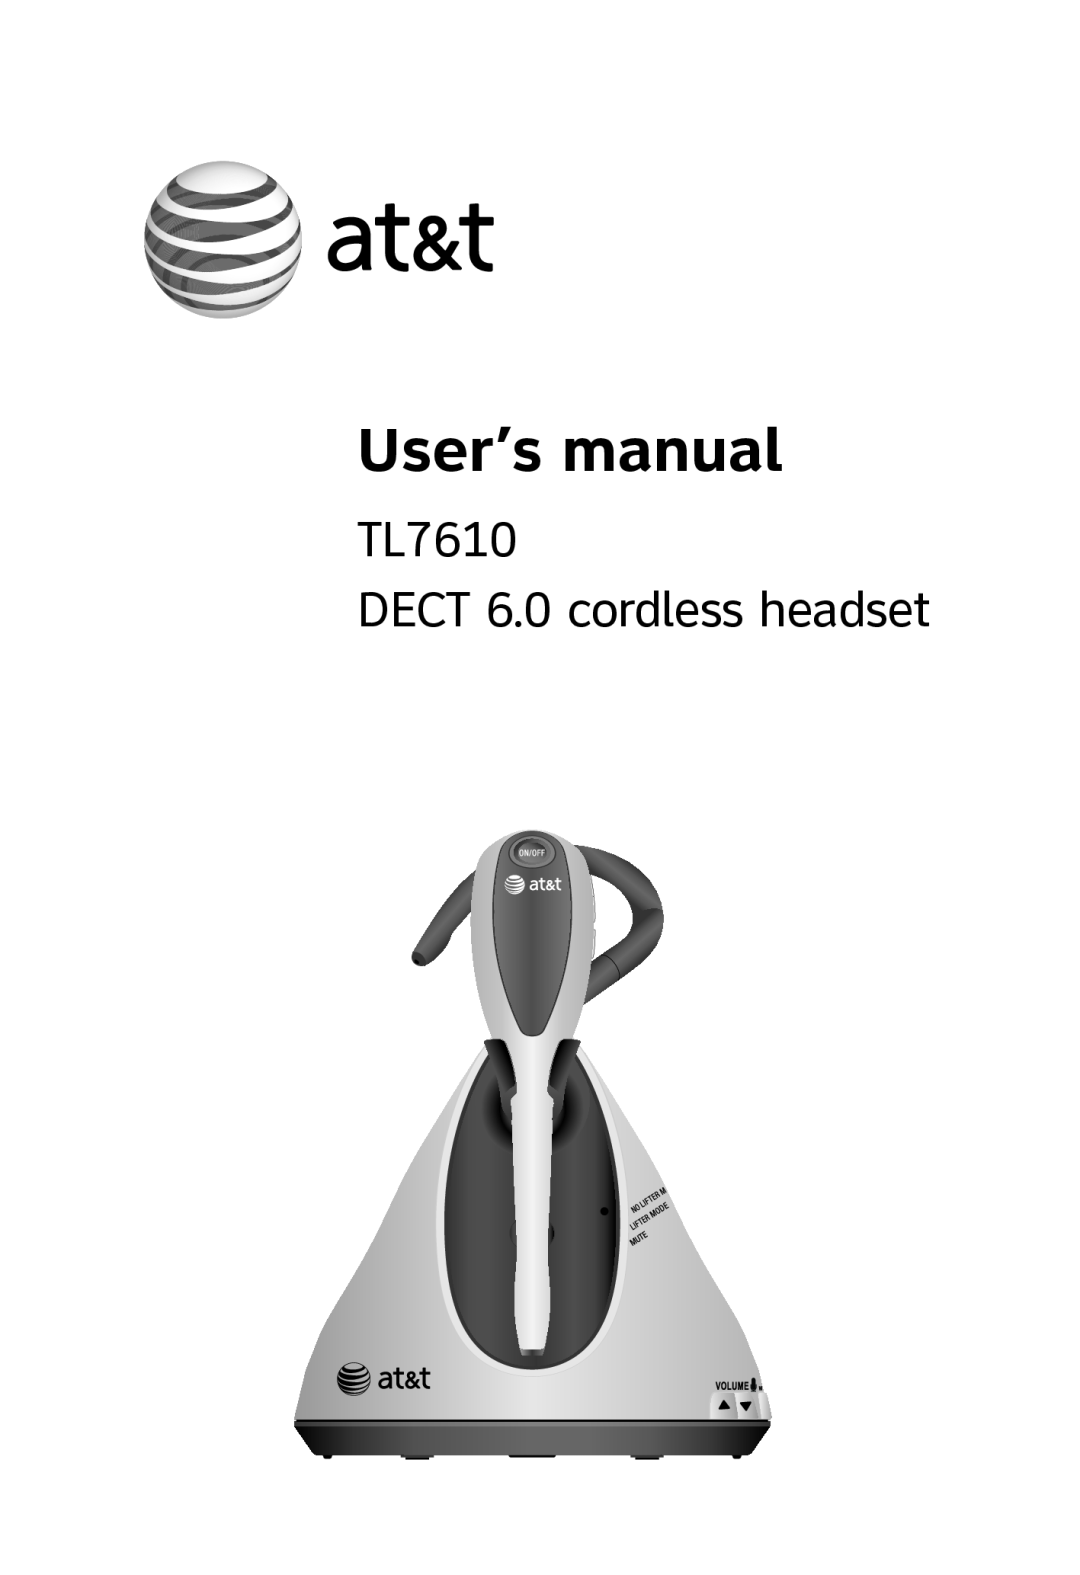 AT&T TL 7610 user manual User’s manual, TL7610 DECT 6.0 cordless headset 